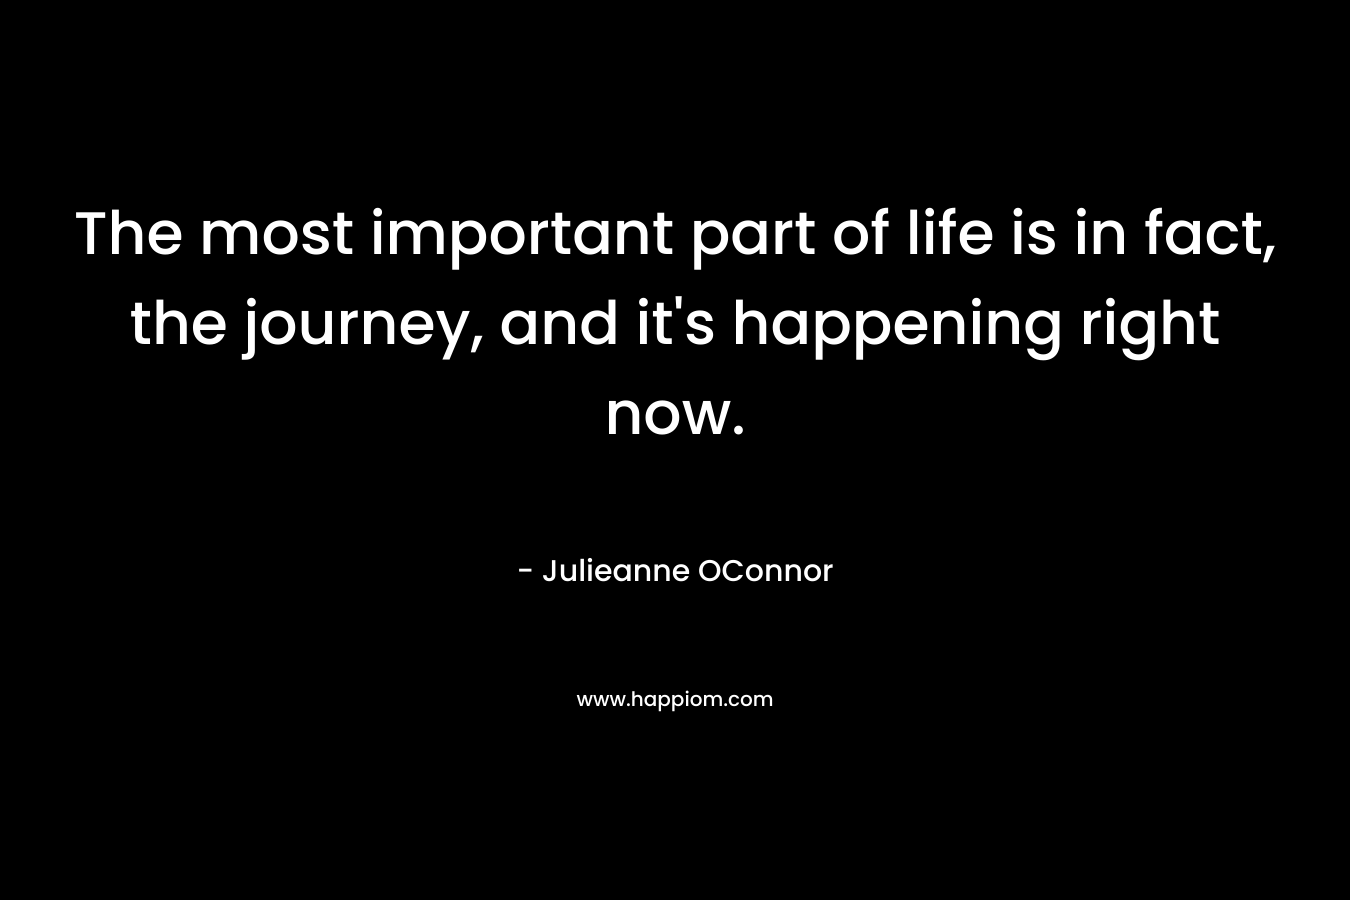 The most important part of life is in fact, the journey, and it's happening right now.